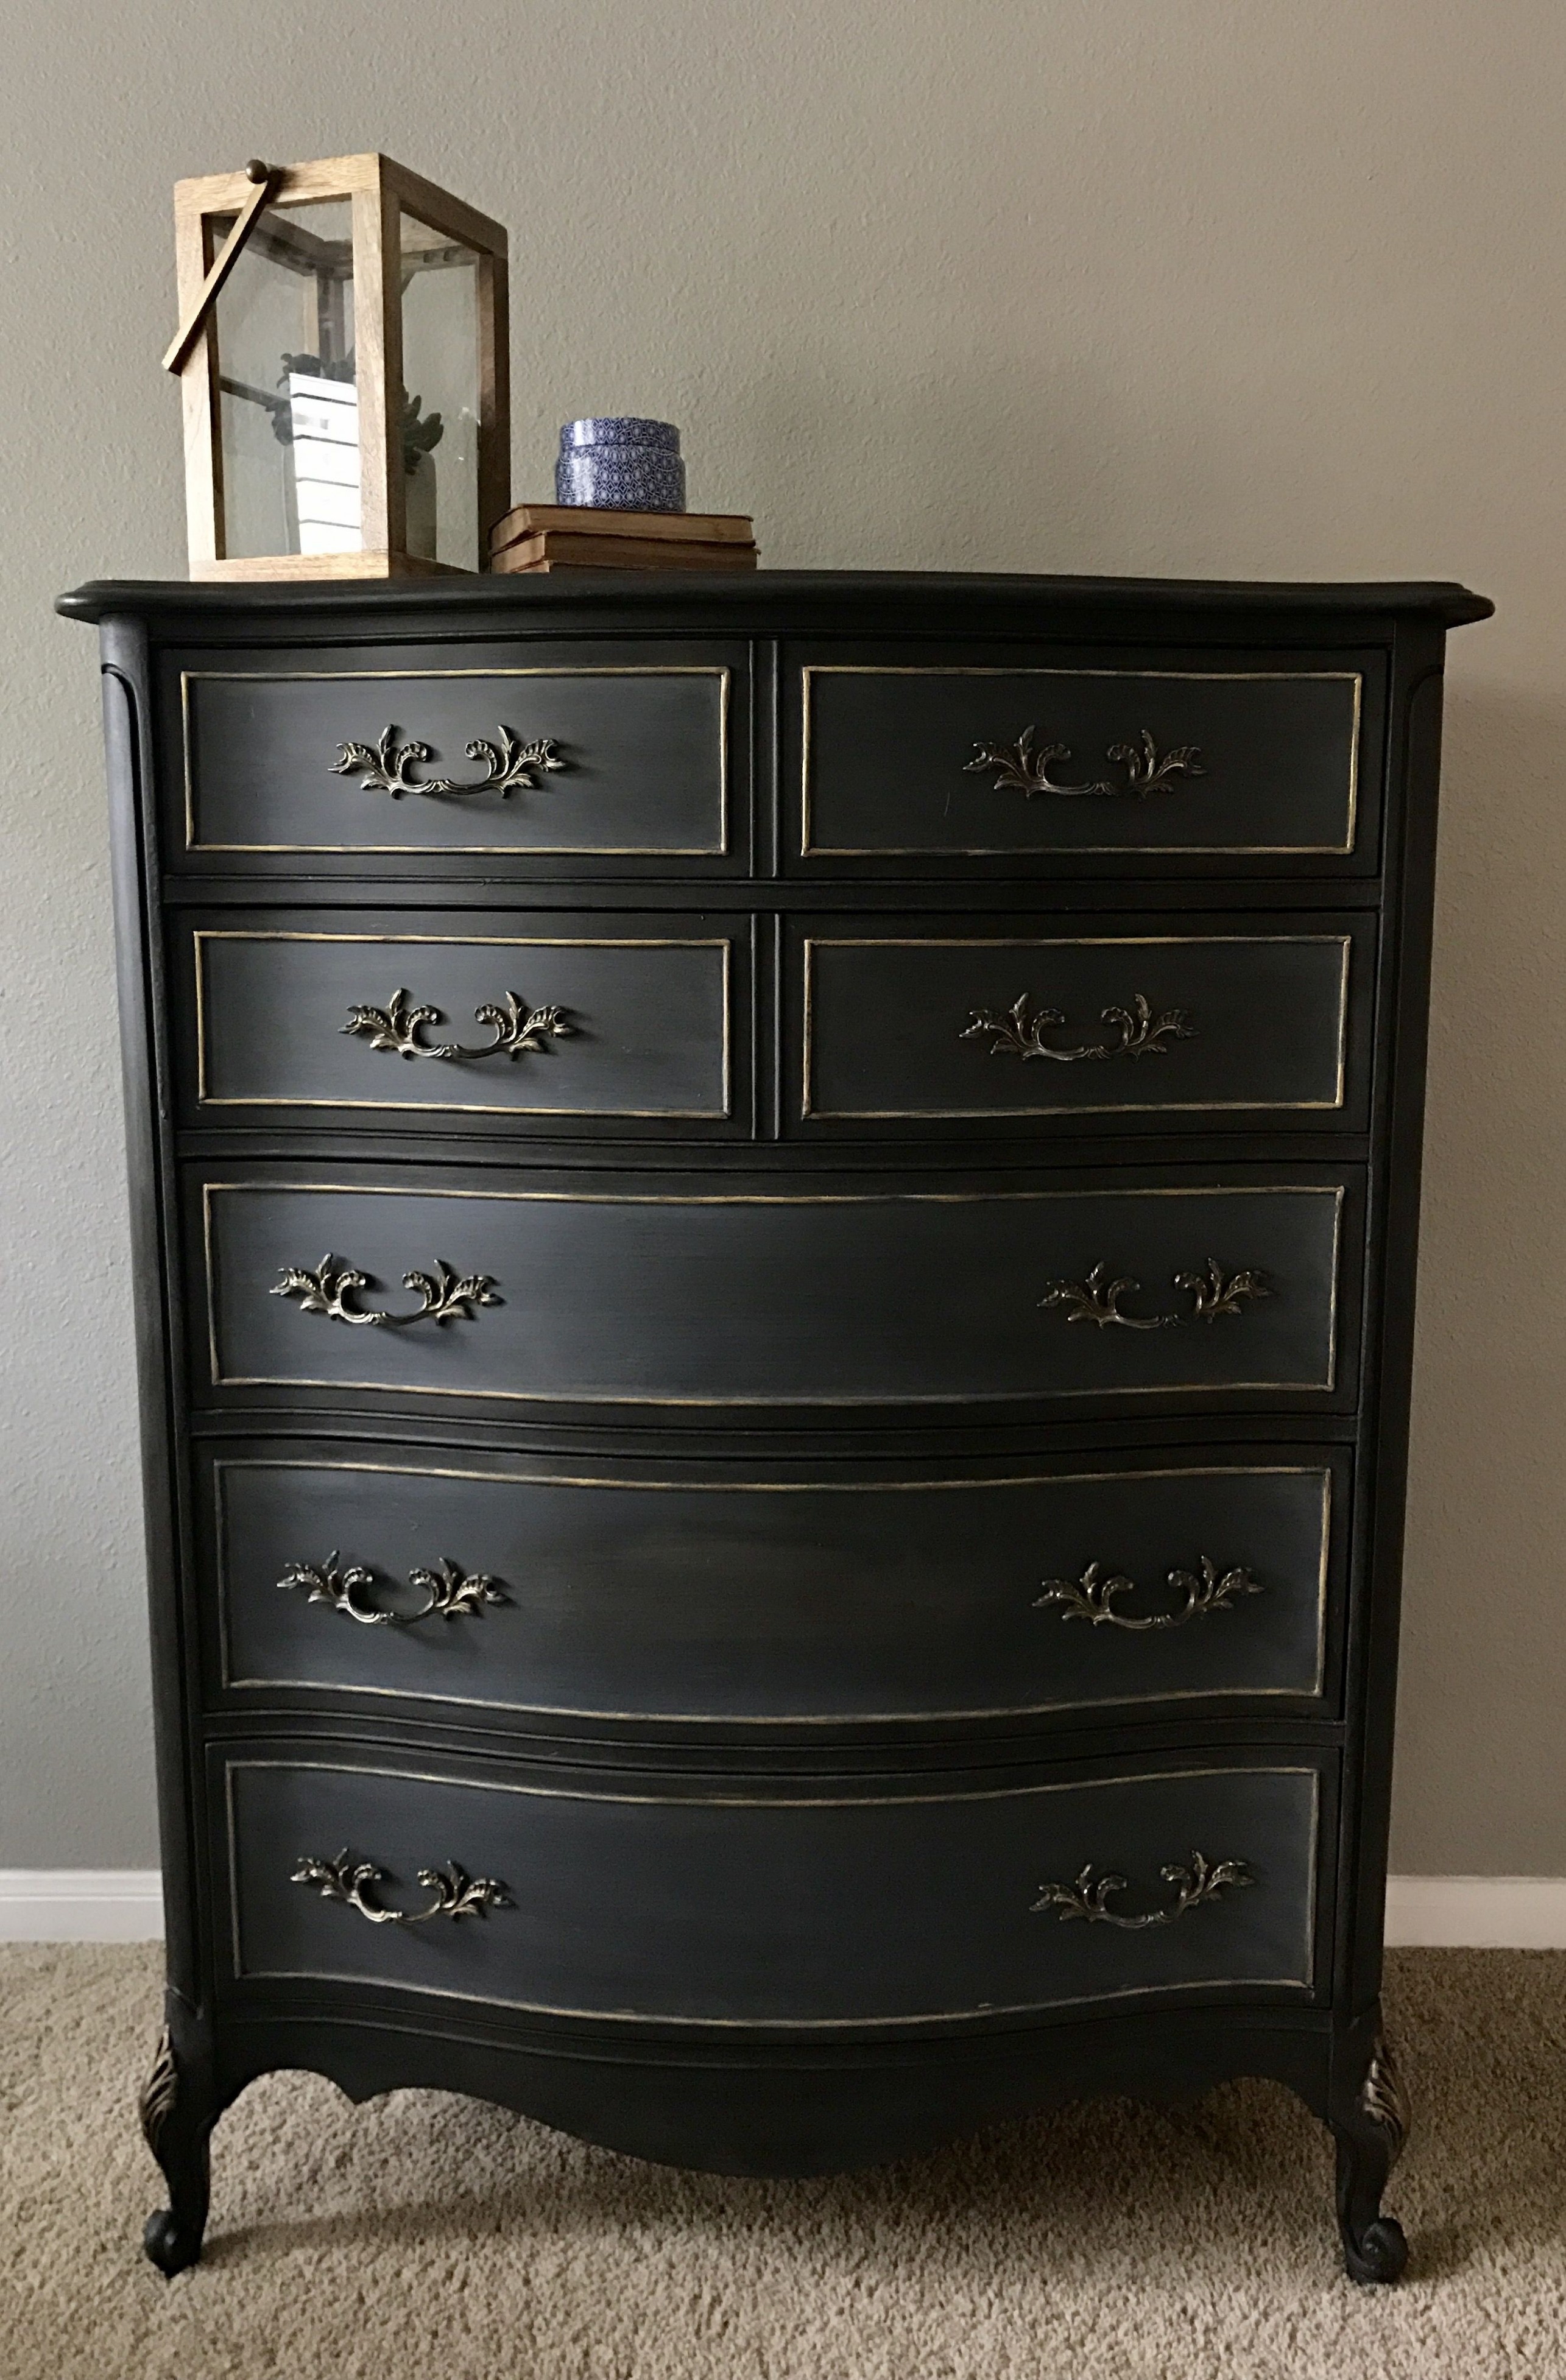 Chalk Paint® By Annie Sloan In A Two Toned Graphite Finish With ..